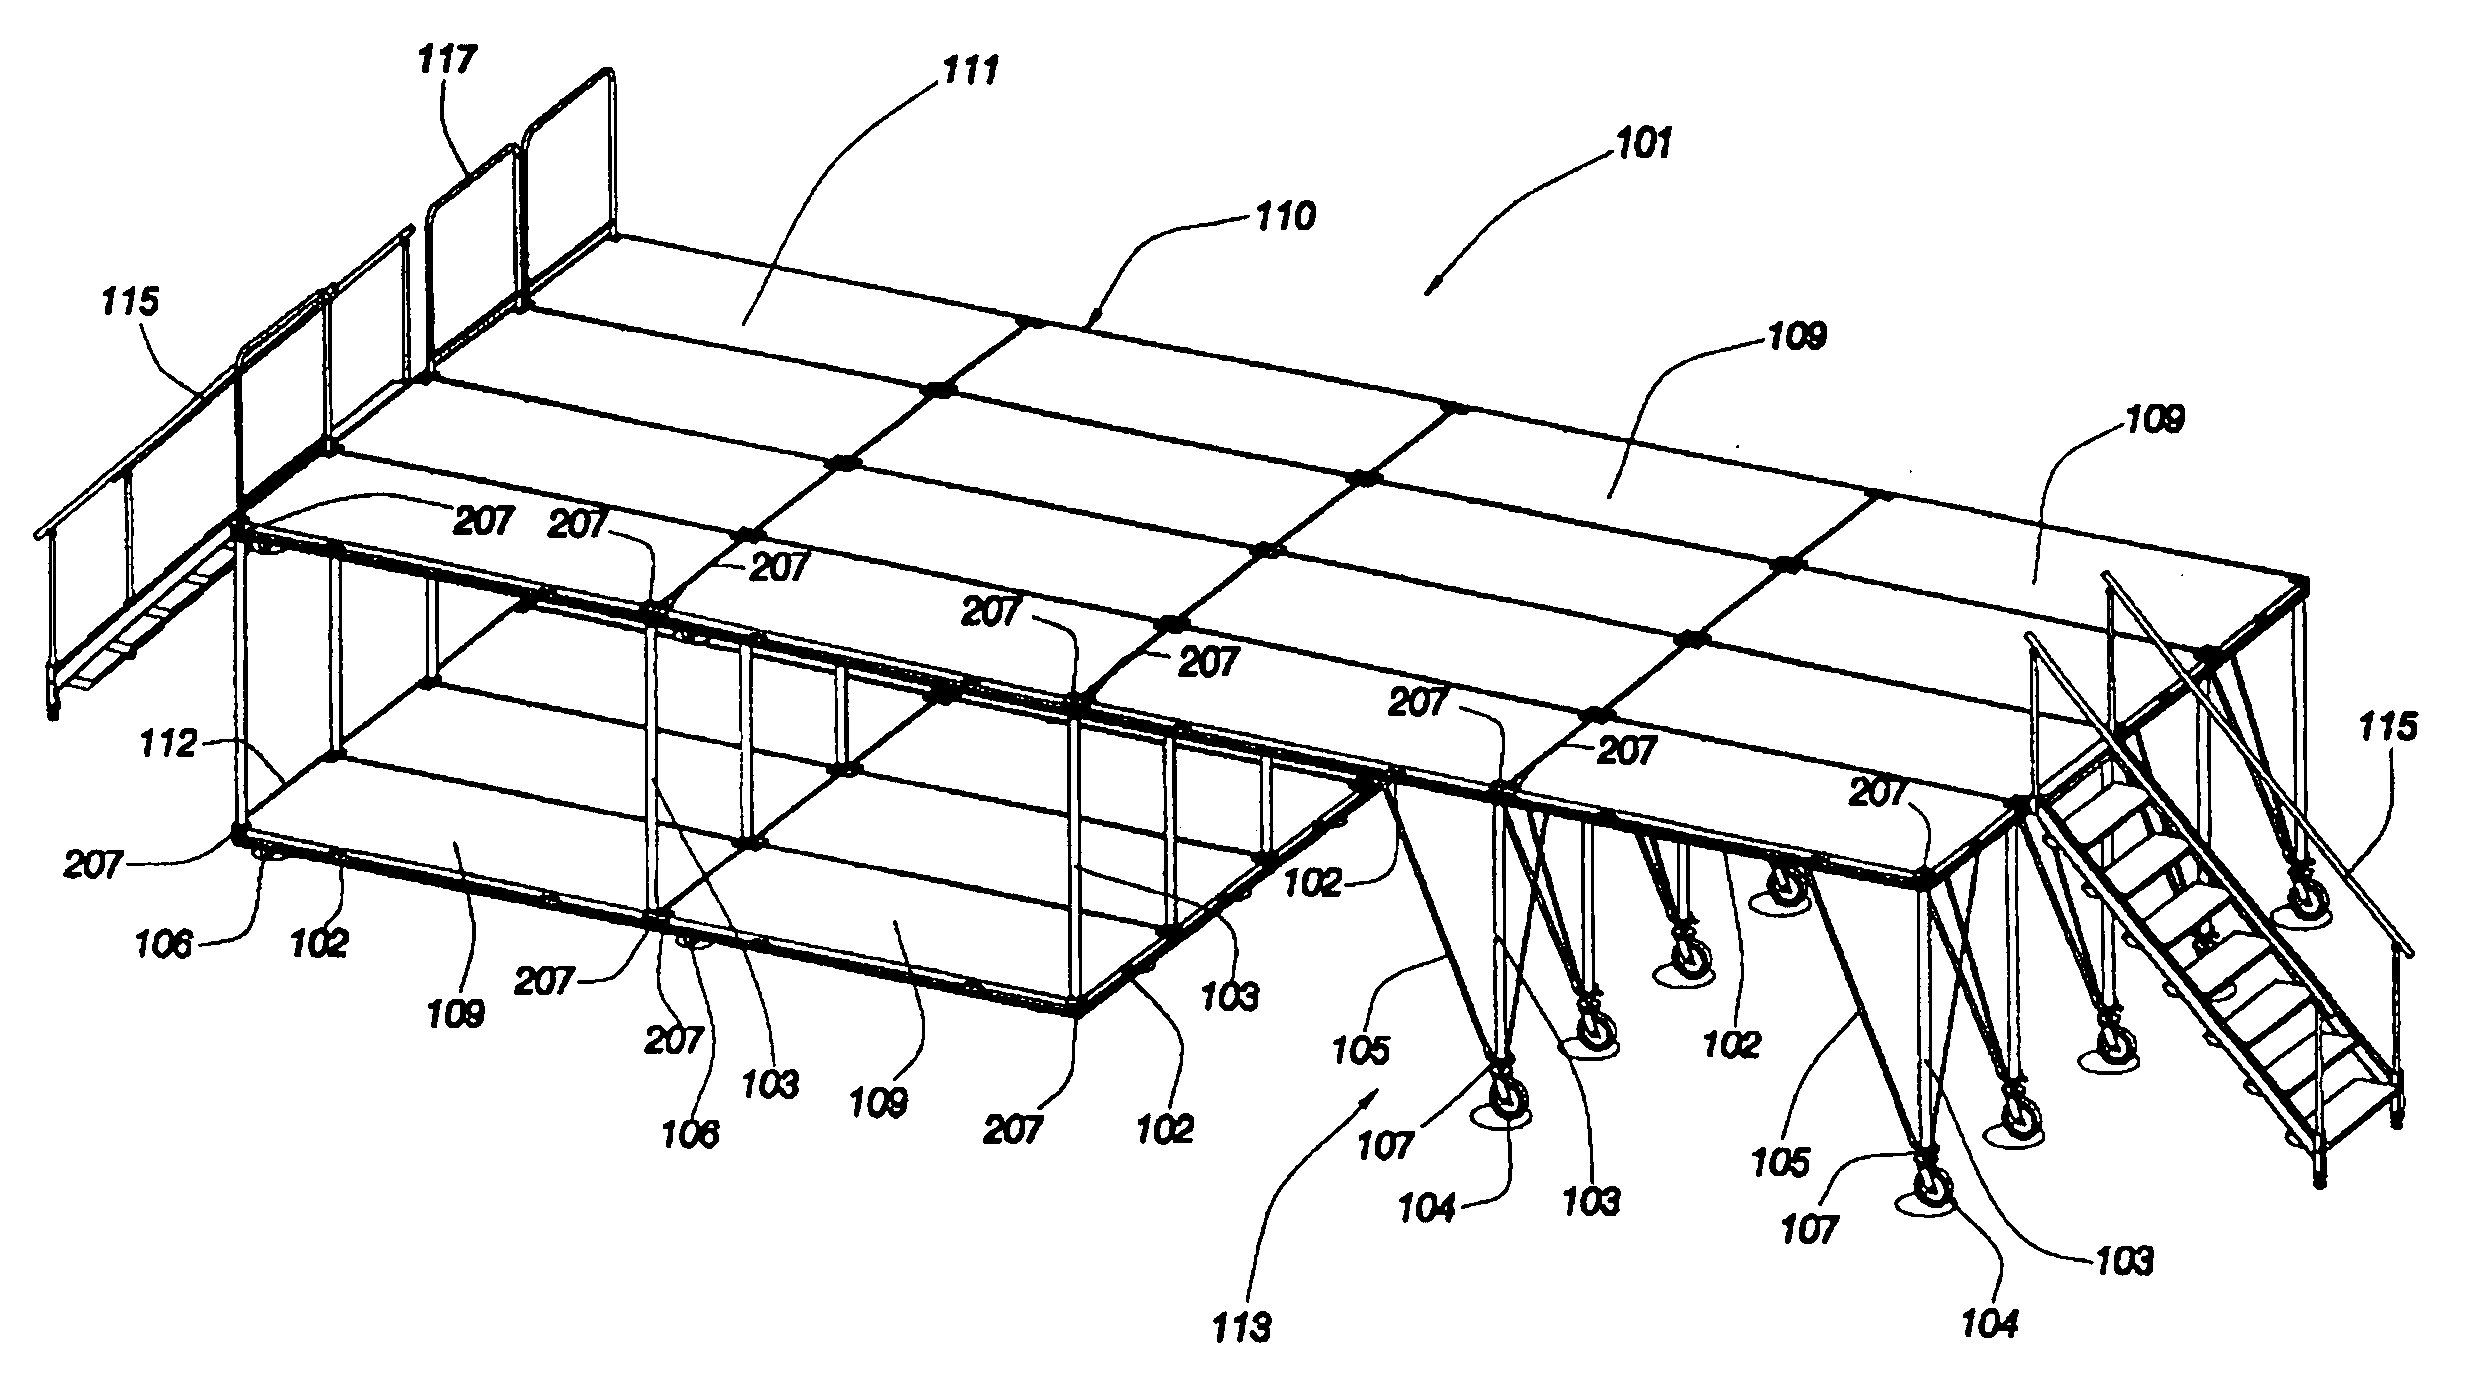 Portable locking support and platform system